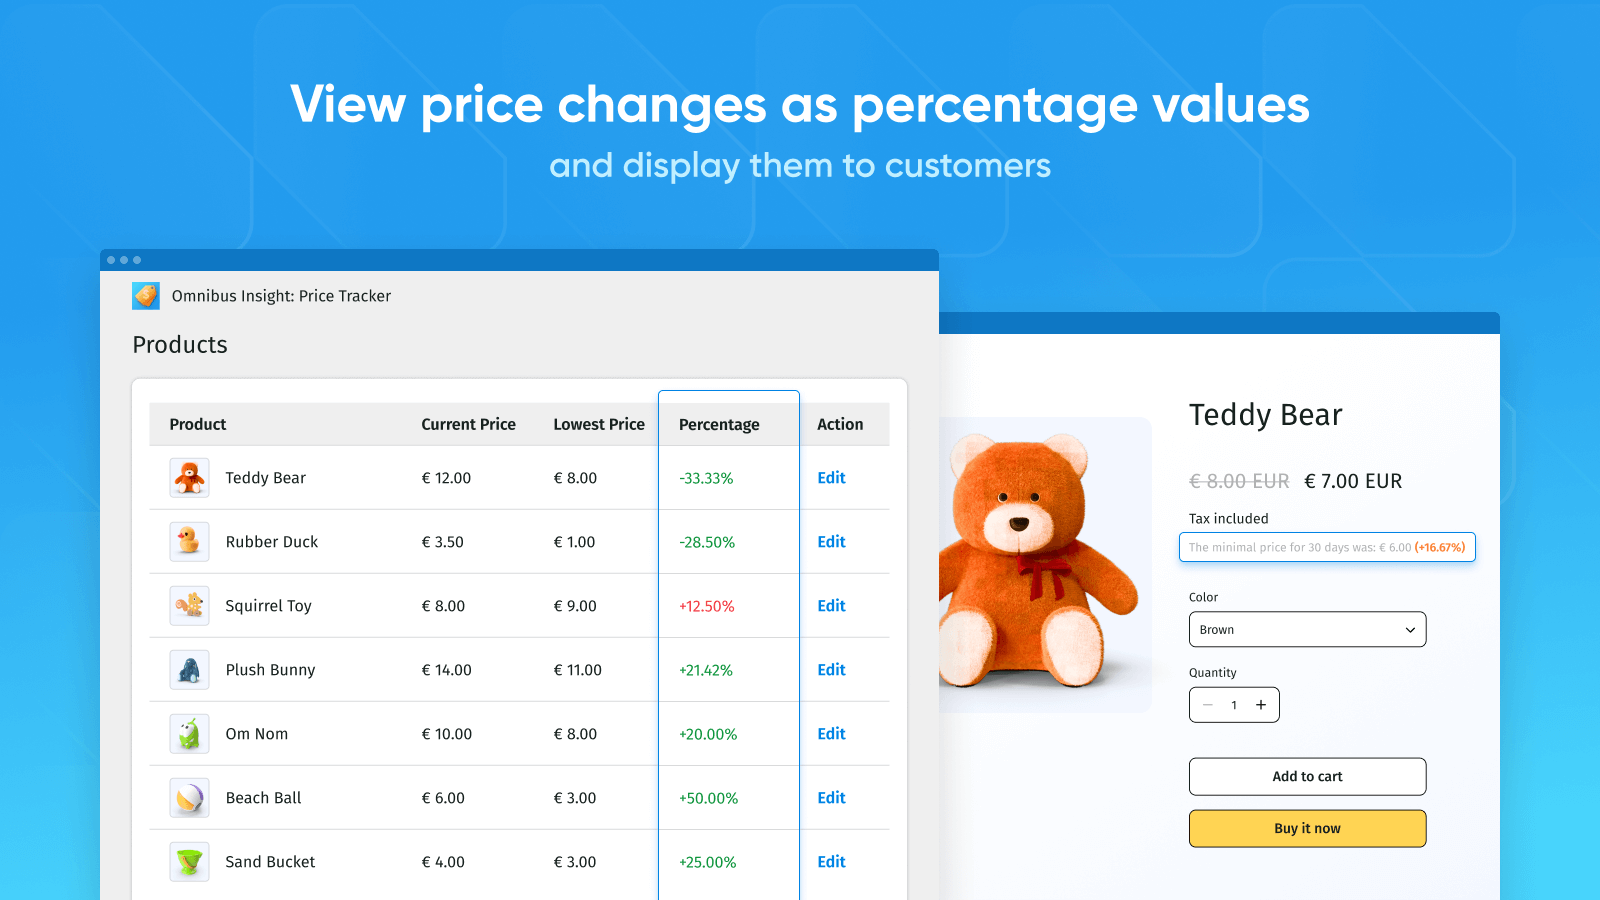 View price changes as percentage values and display them 